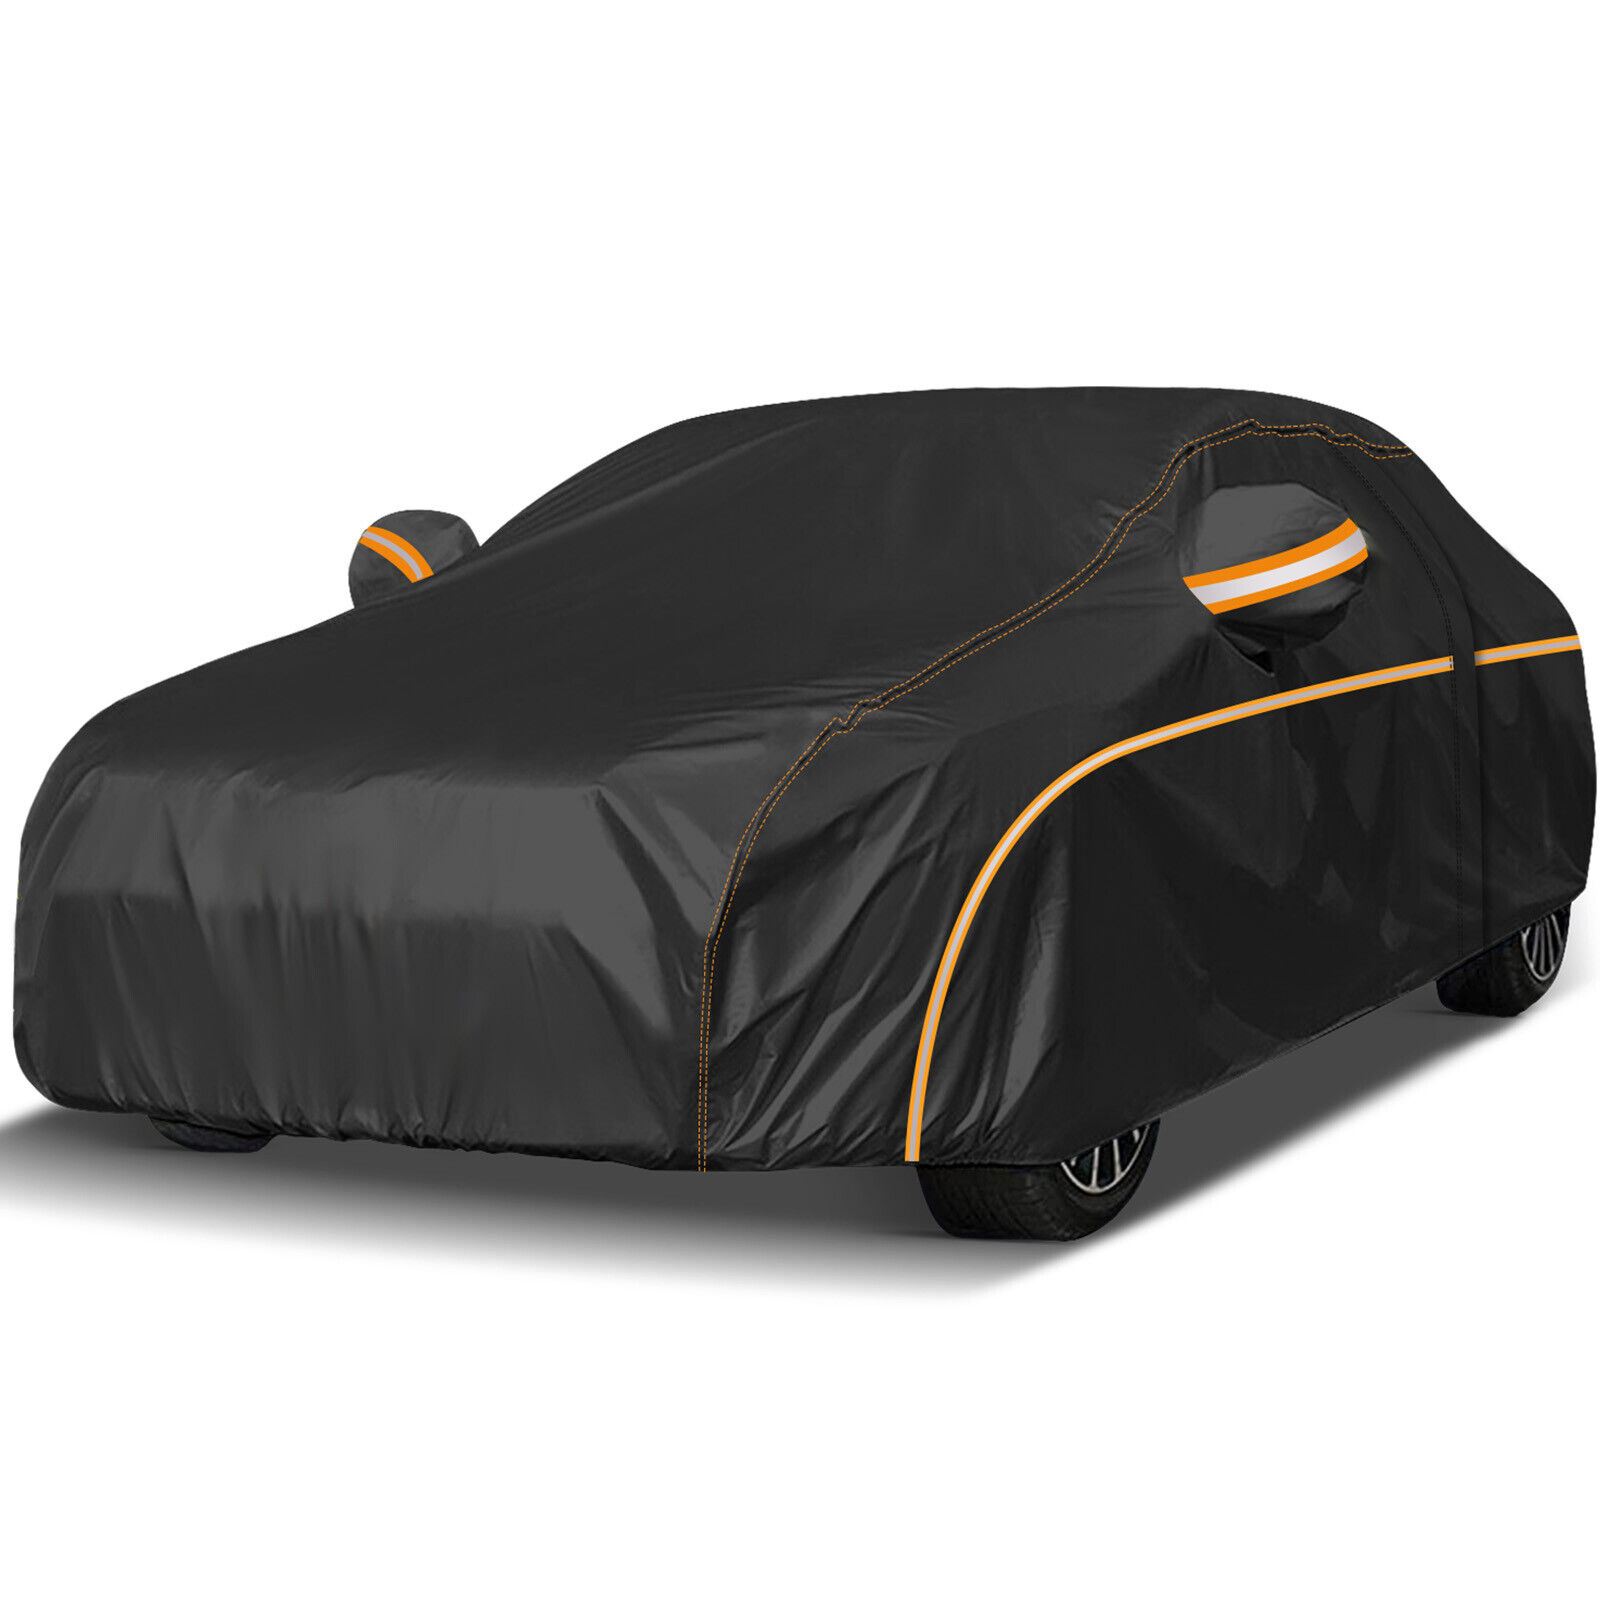 NEVERLAND Car Cover Dust Waterproof UV Resistant Sun Protection Fit for 4.7m-5m